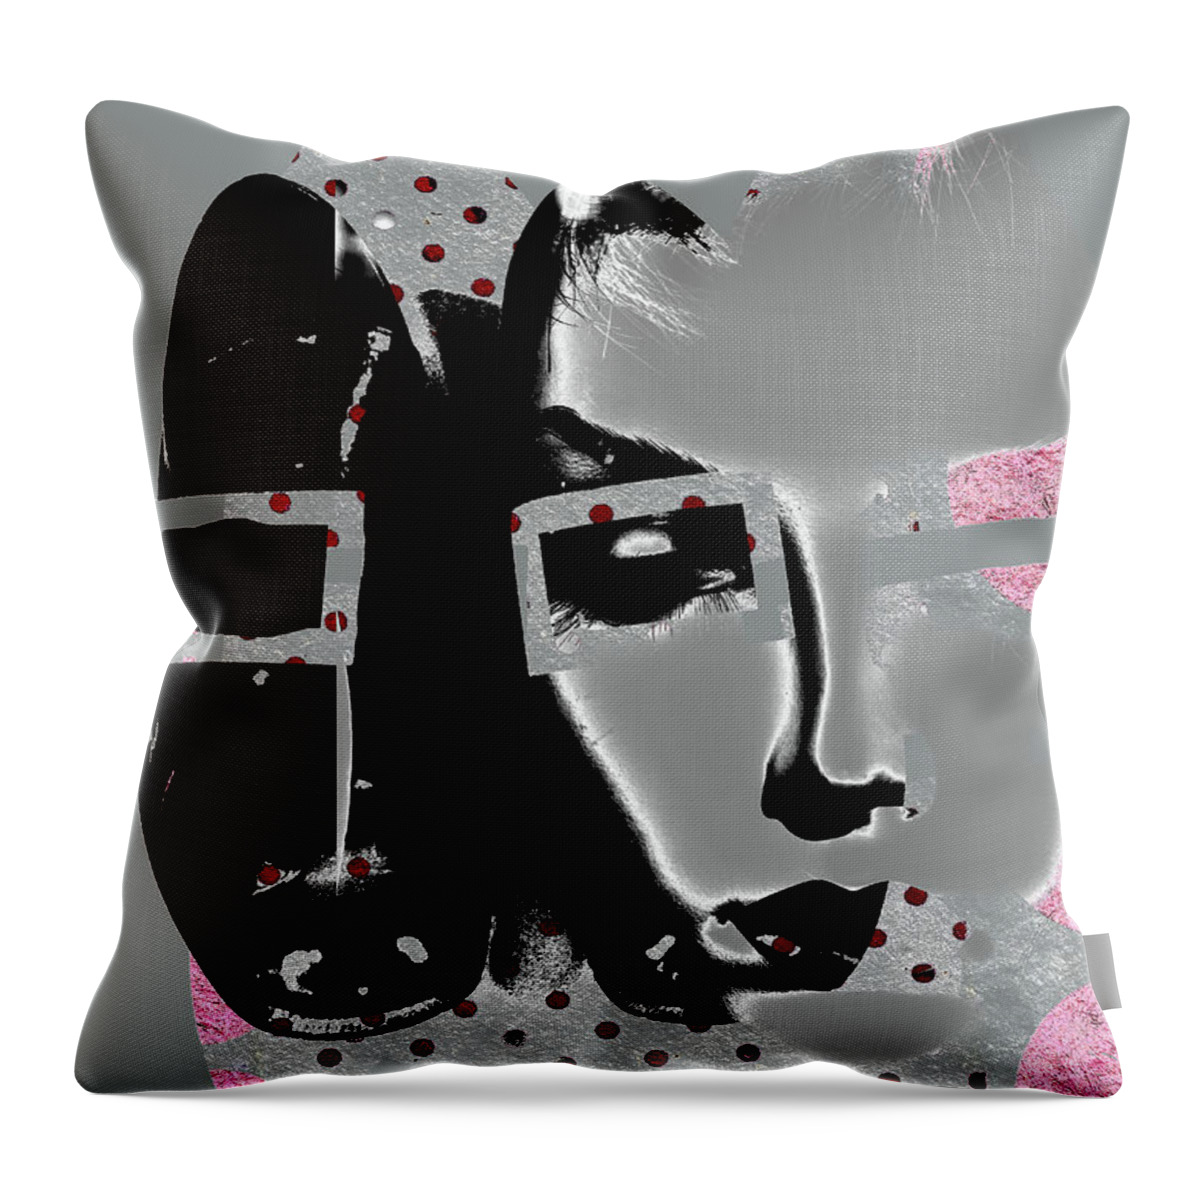 Woman Throw Pillow featuring the digital art Looking for black shoes by Gabi Hampe